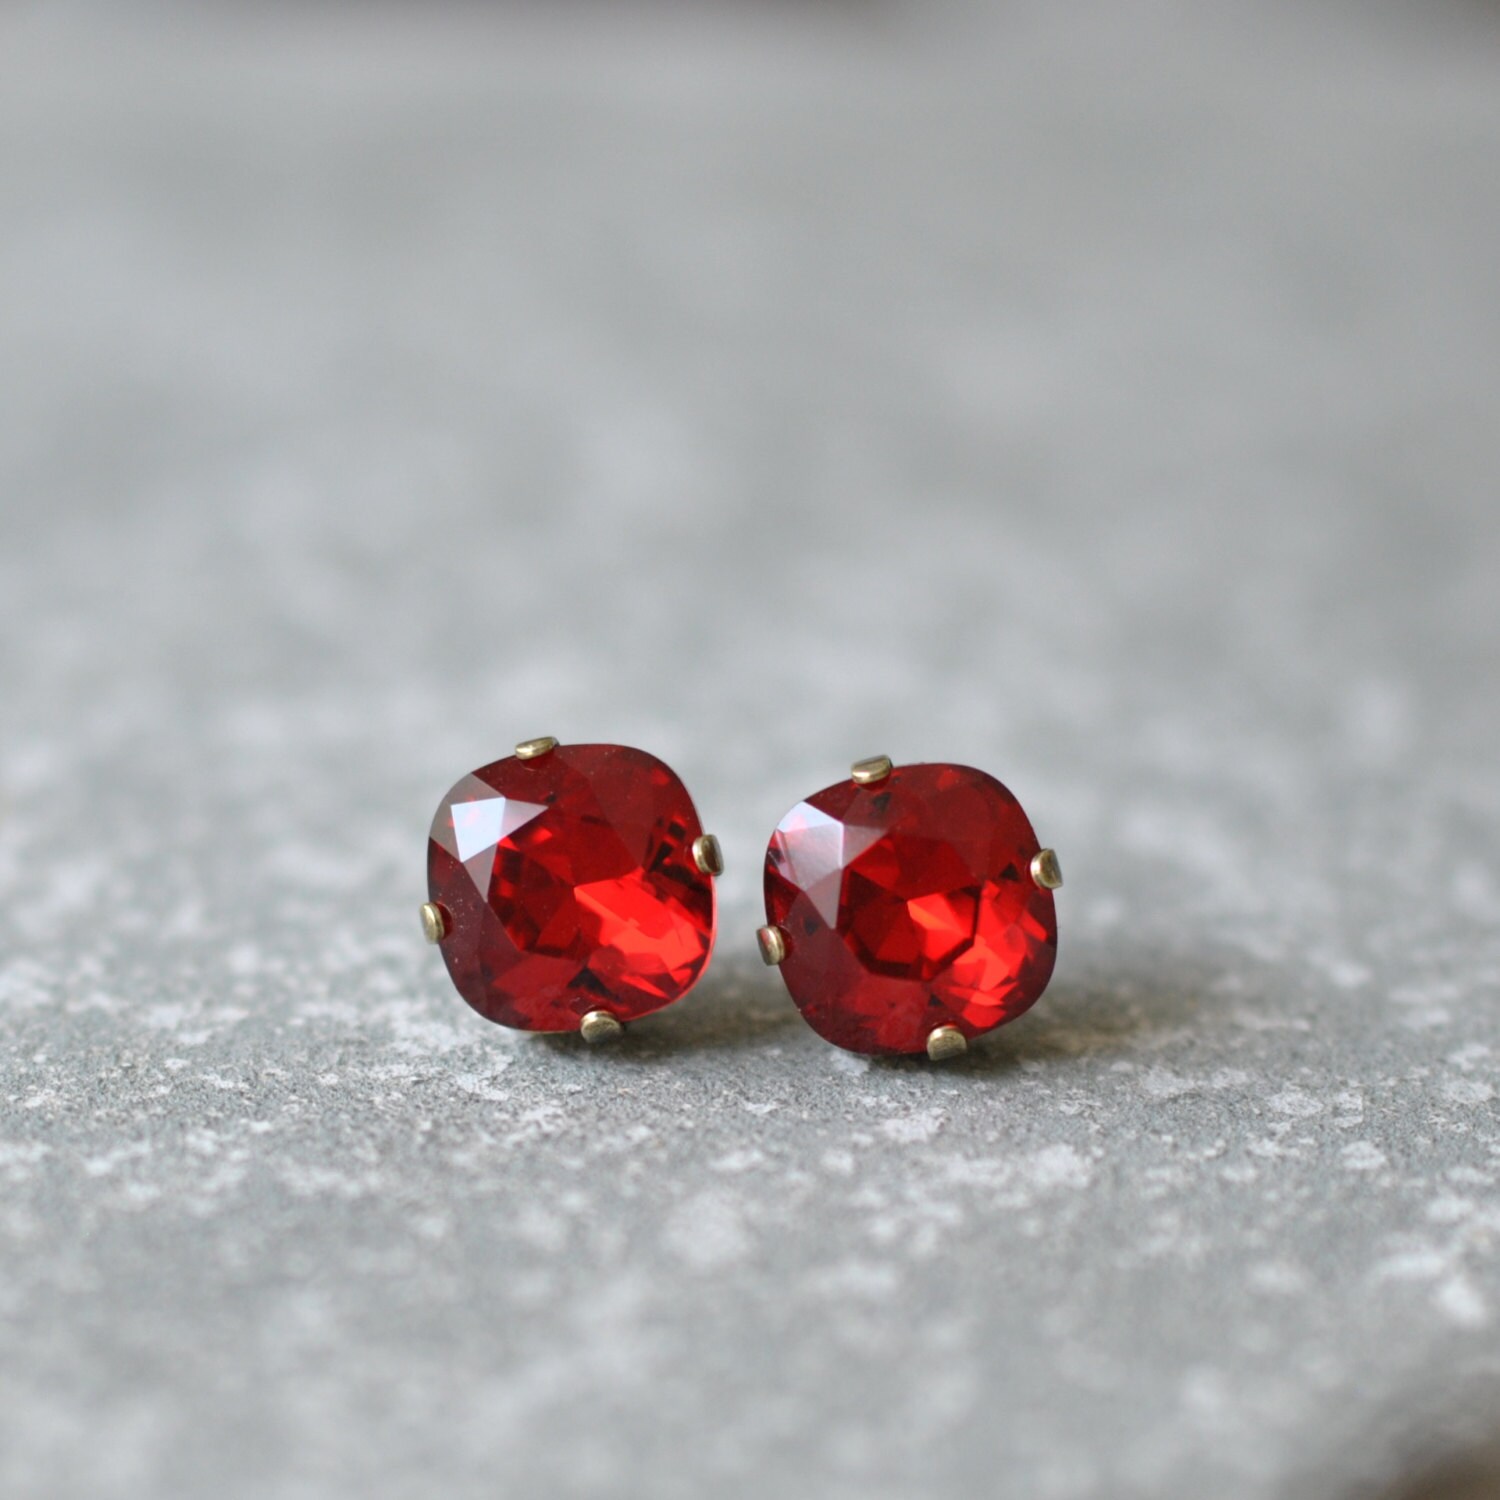 Ruby Red Earrings Swarovski Crystal Bright Red Square Stud